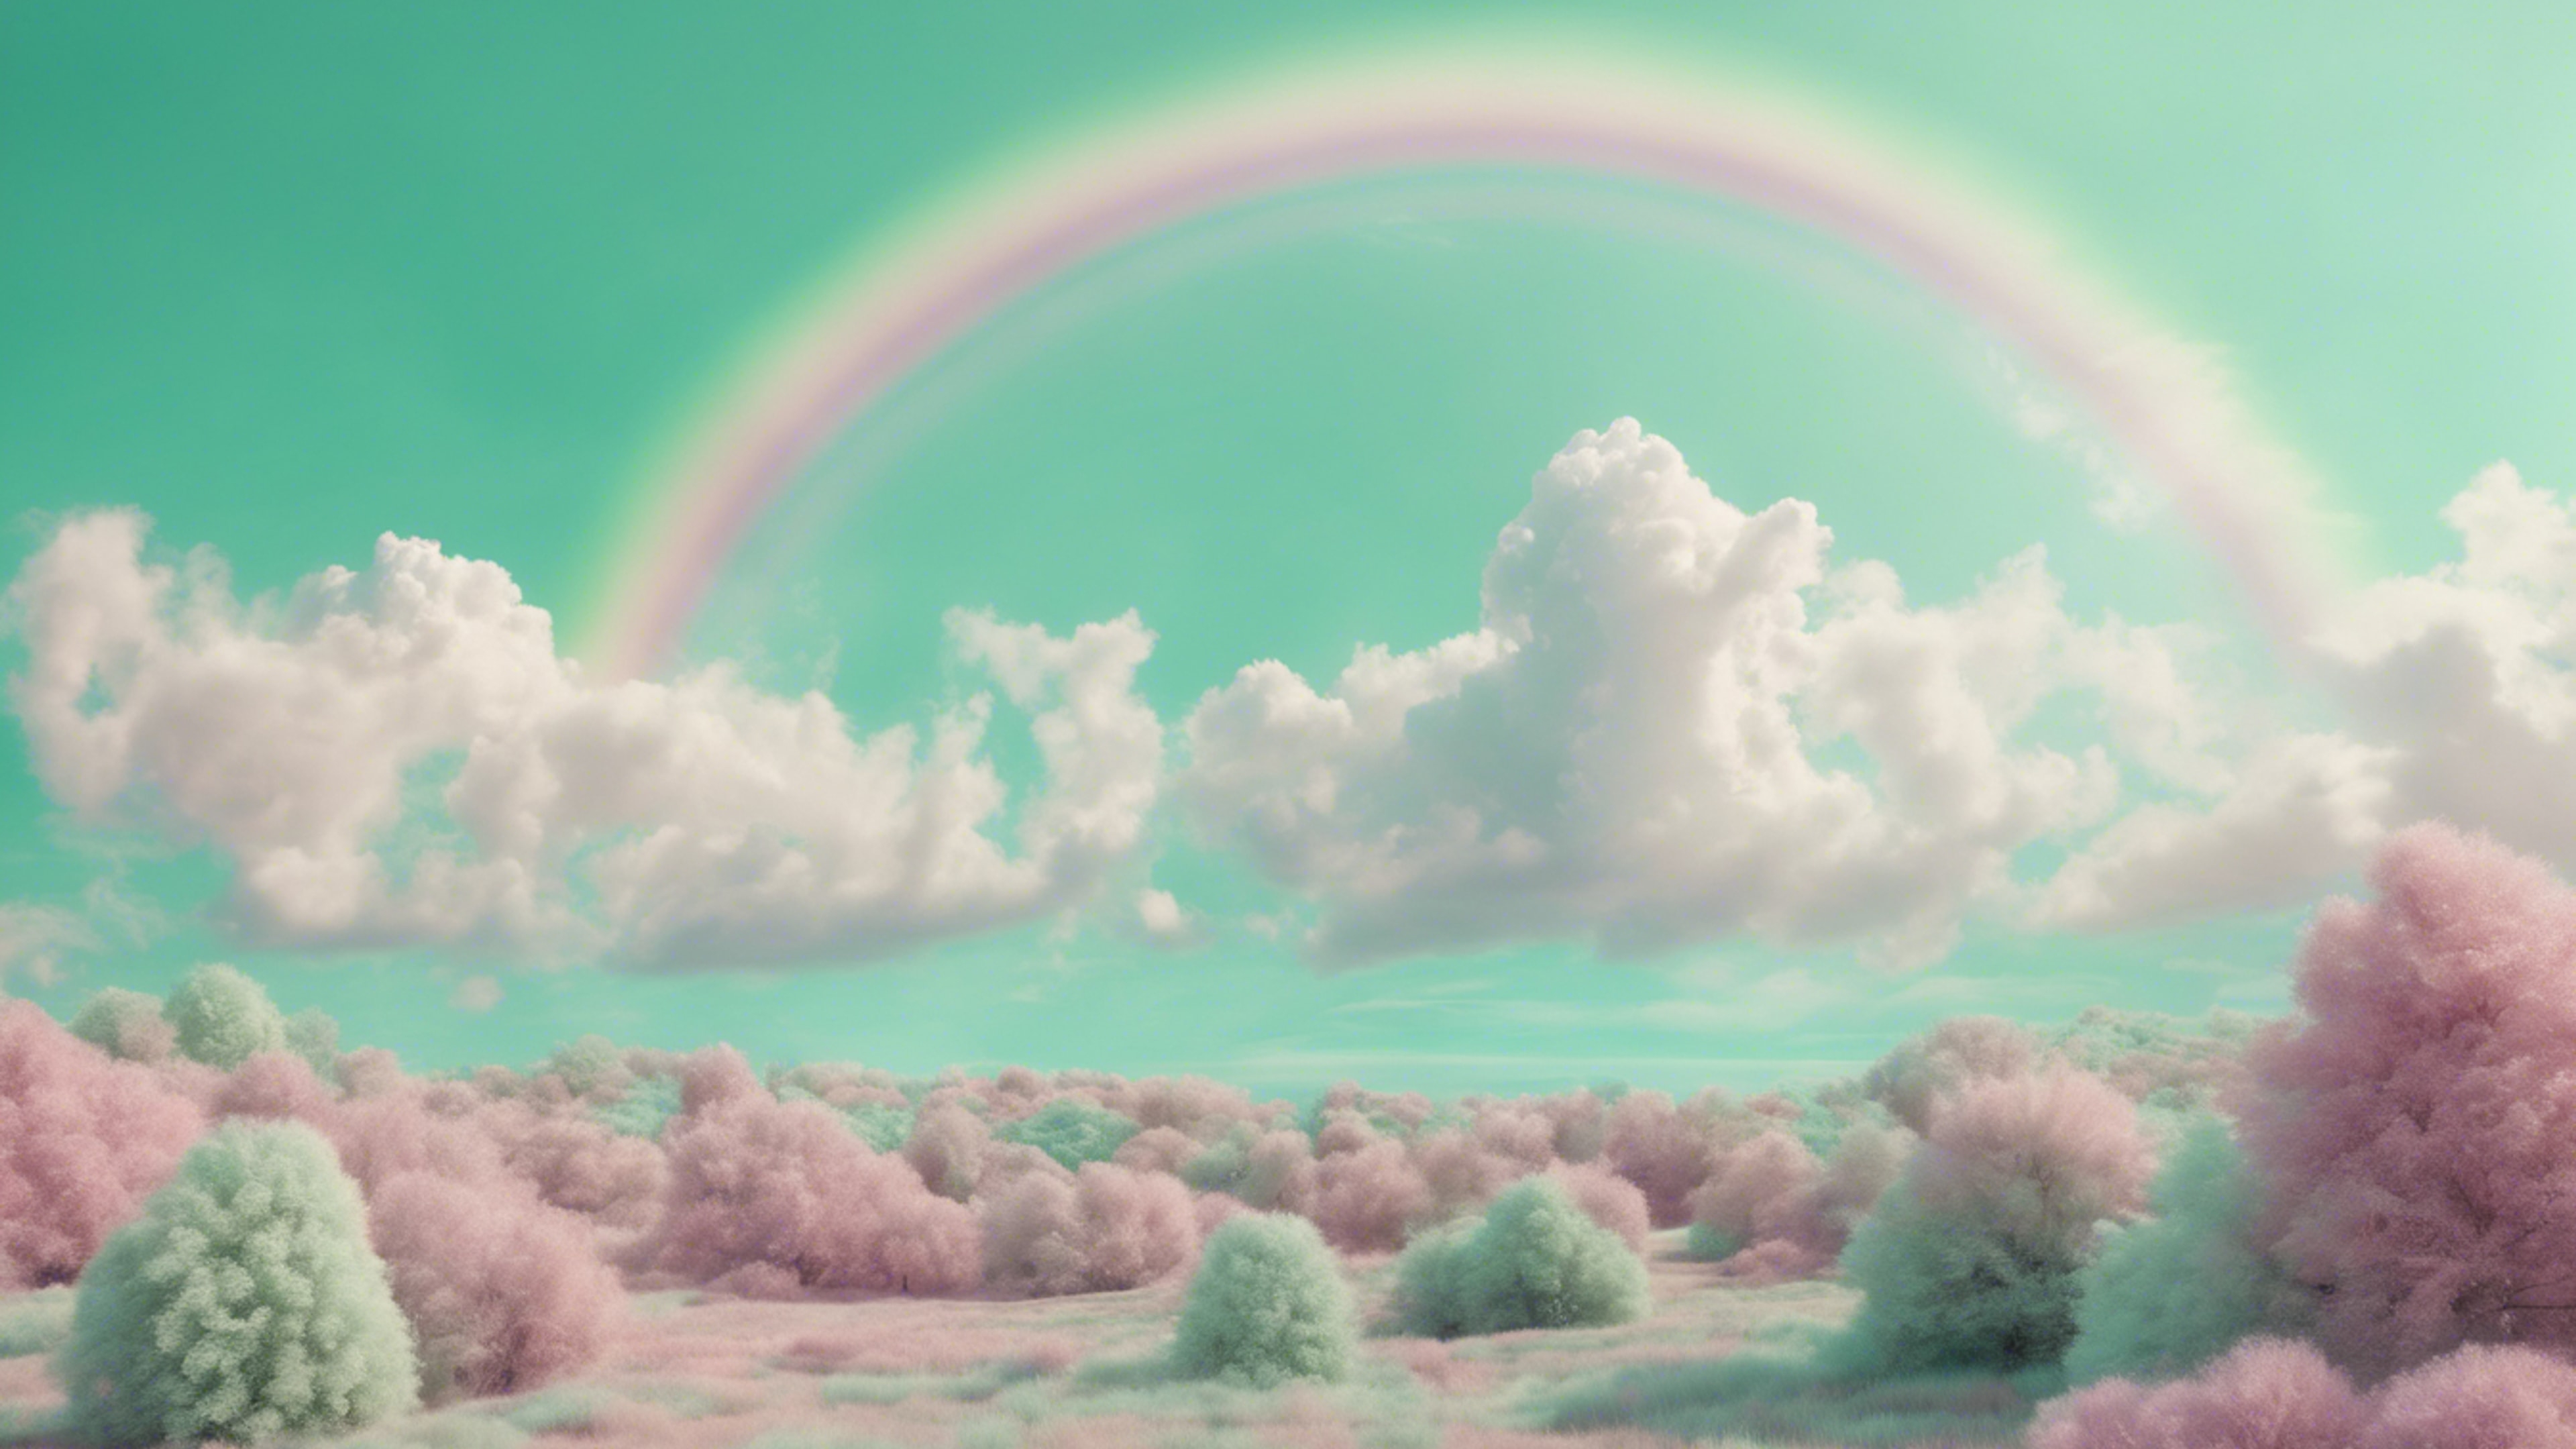 Surrealistic mint green landscape with kawaii styled pastel rainbows and fluffy clouds.壁紙[5137fd613a9a4b85a9d3]